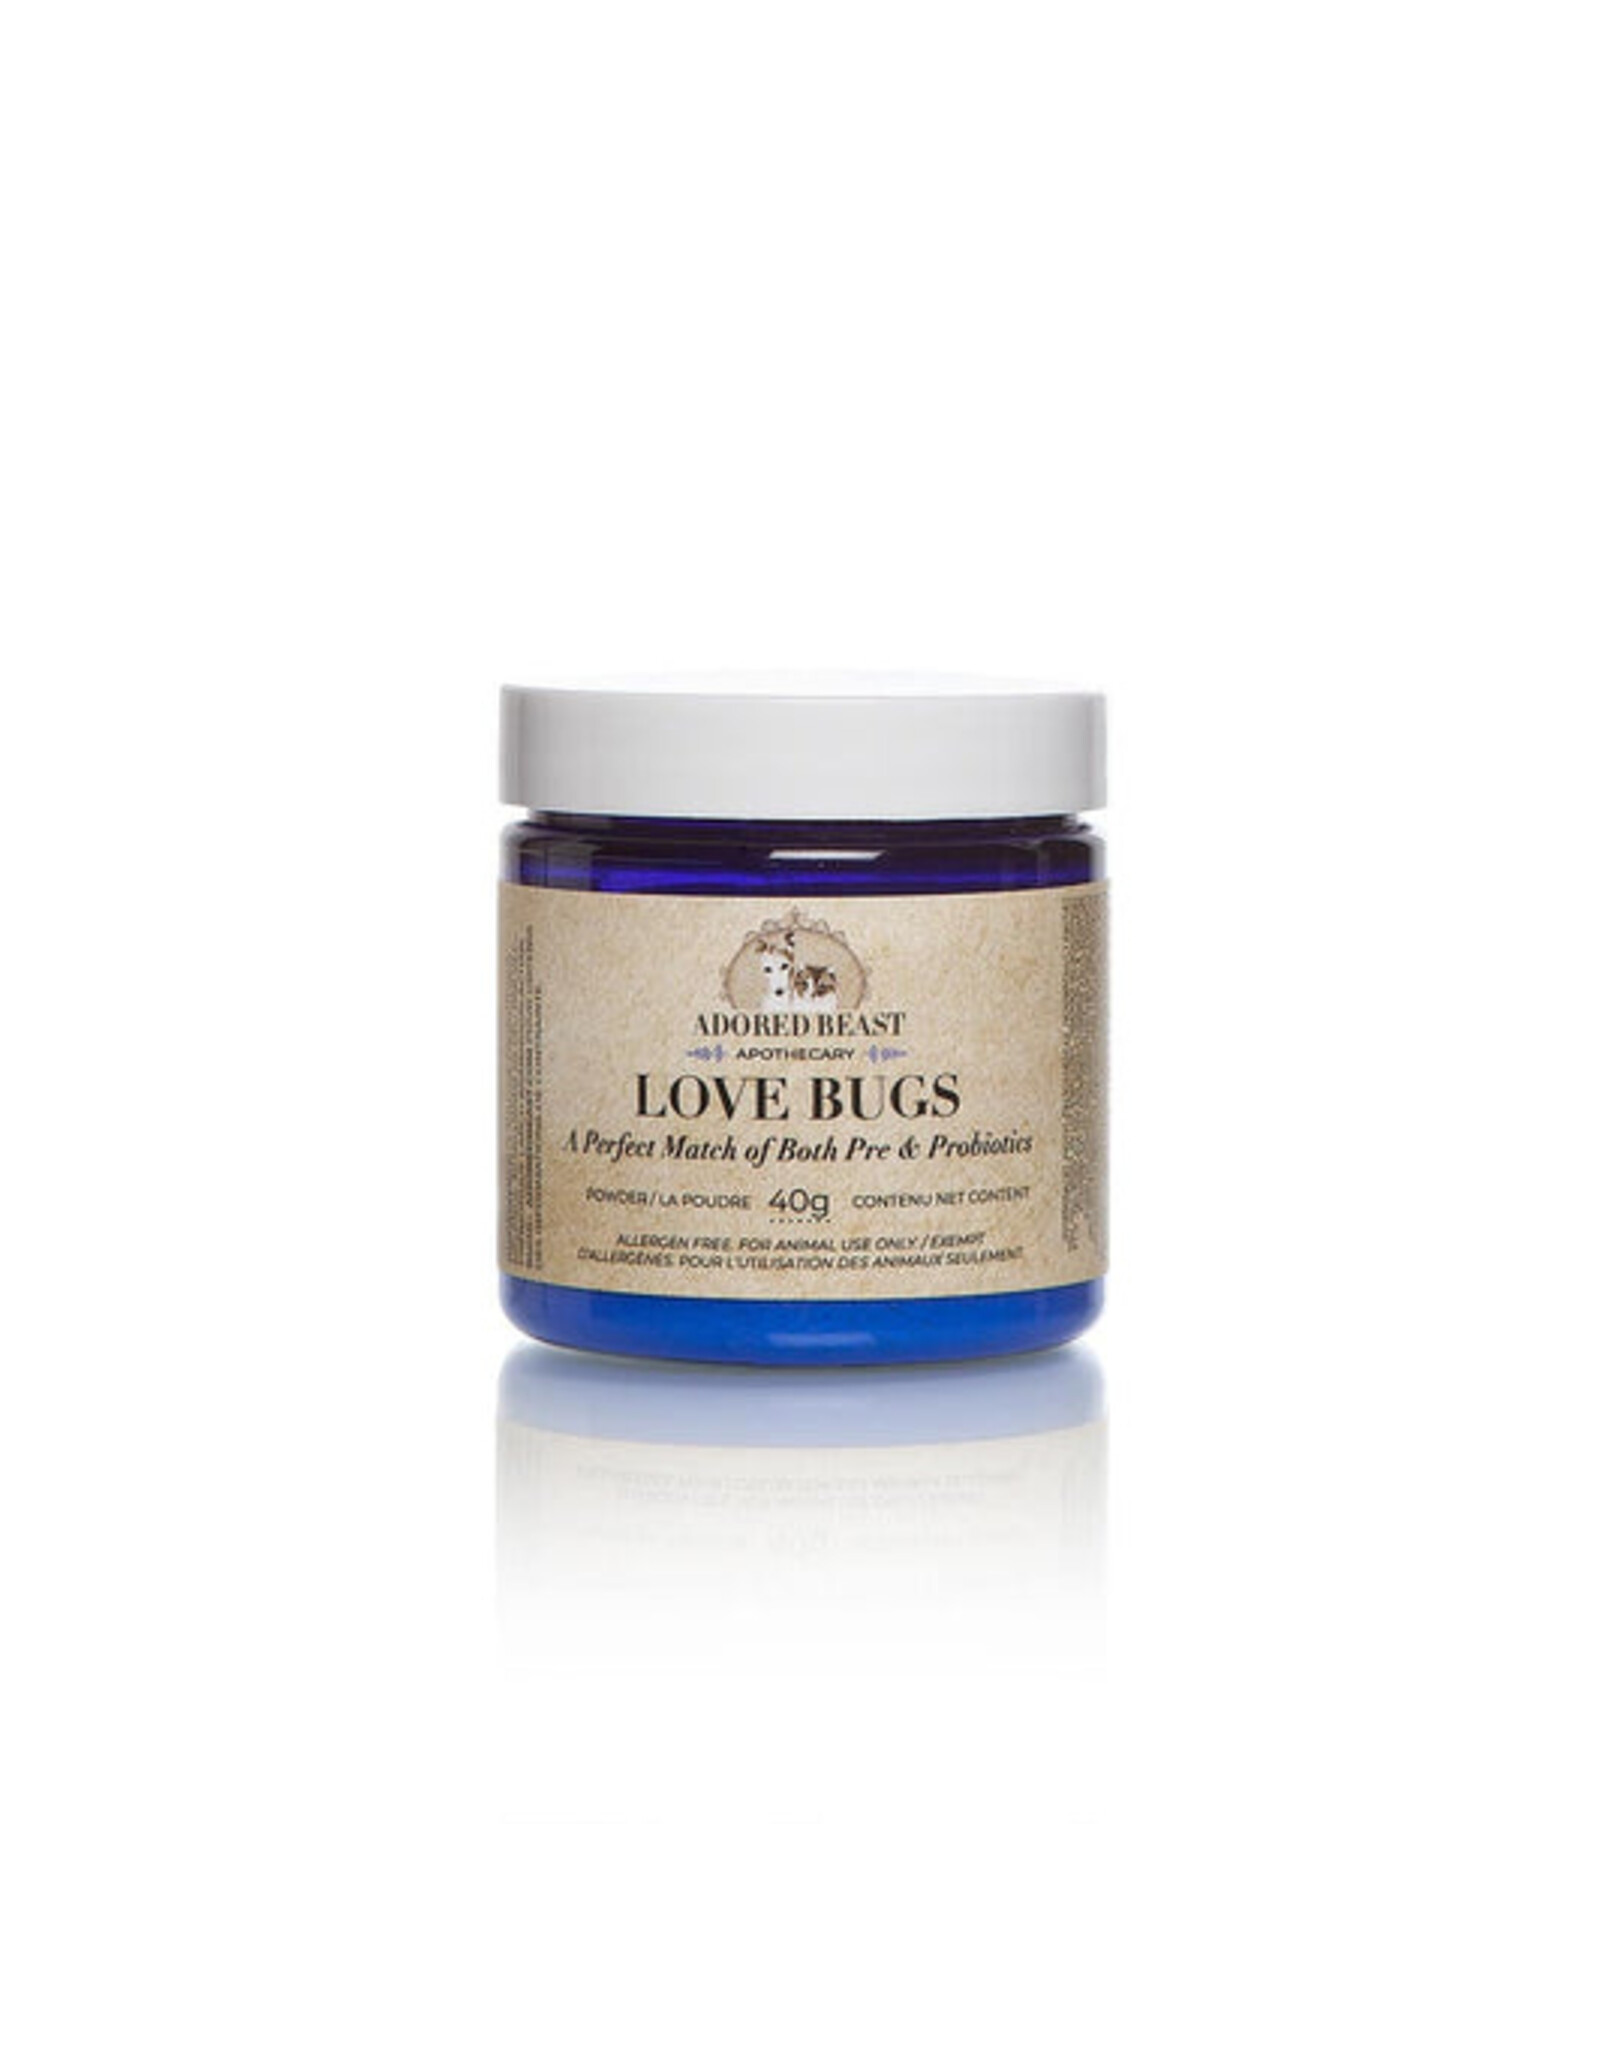 Adored Beast Apothecary Love Bugs - Pre & Probiotics 80g